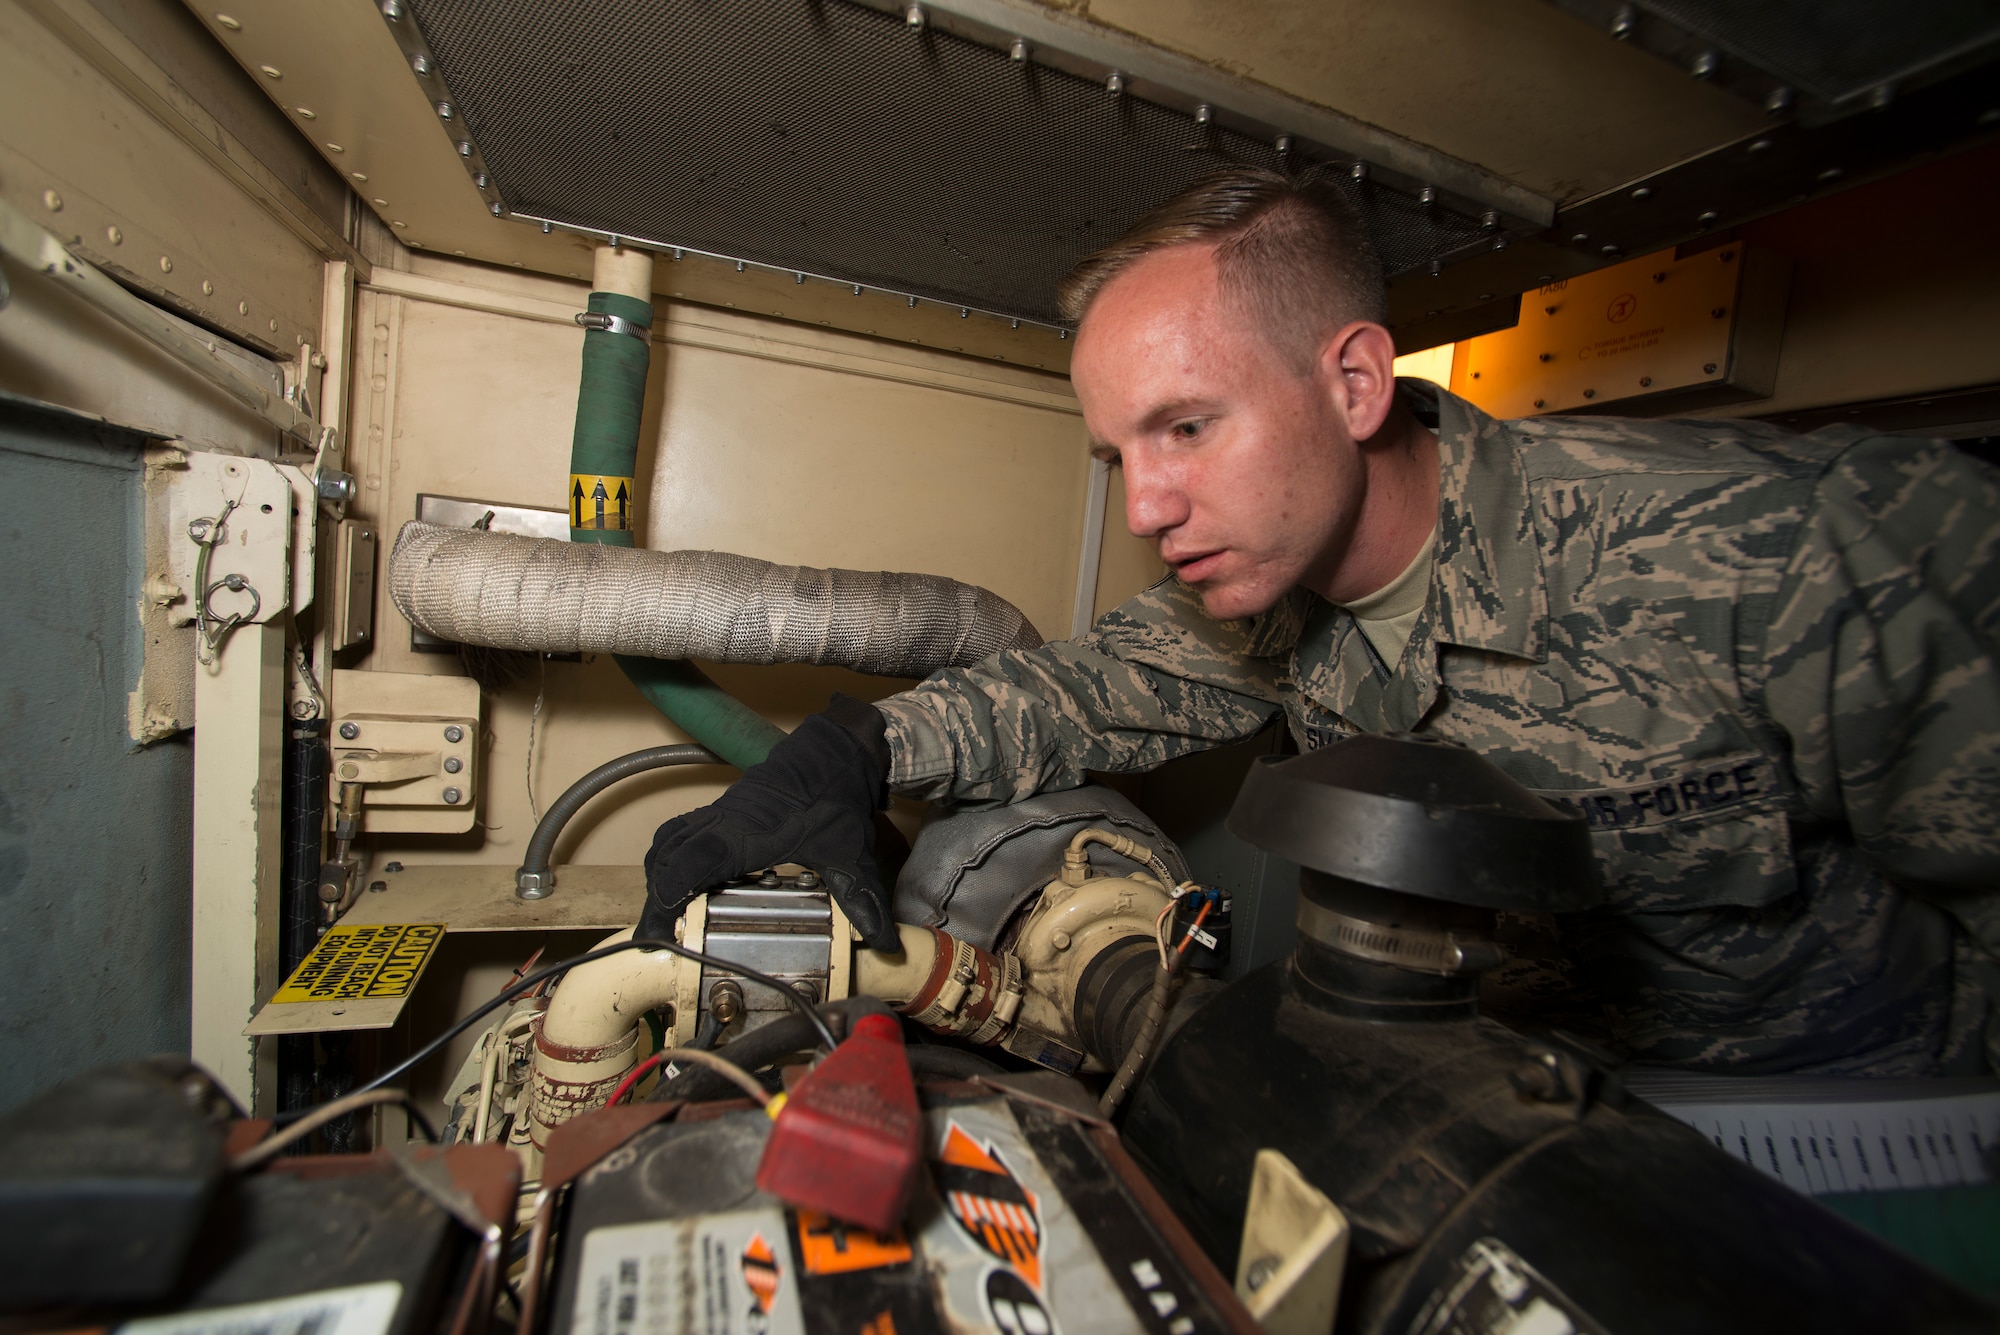 U.S. Air Force Senior Airman Jonathan R. Smail, a transmission technician from the 233rd Space Communications Squadron, Colorado Air National Guard, inspects the generators in a mobile satellite trailer at Greeley Air National Guard Station, Greeley, Colo., June 7, 2015. Smail, who troubleshoots and maintains satellite communications electronic equipment for the 233d's one-of-a-kind mobile nuclear and missile launch tracking mission, won the 2014 Air National Guardsman of the year. (Air National Guard photo by Tech. Sgt. Wolfram M. Stumpf)